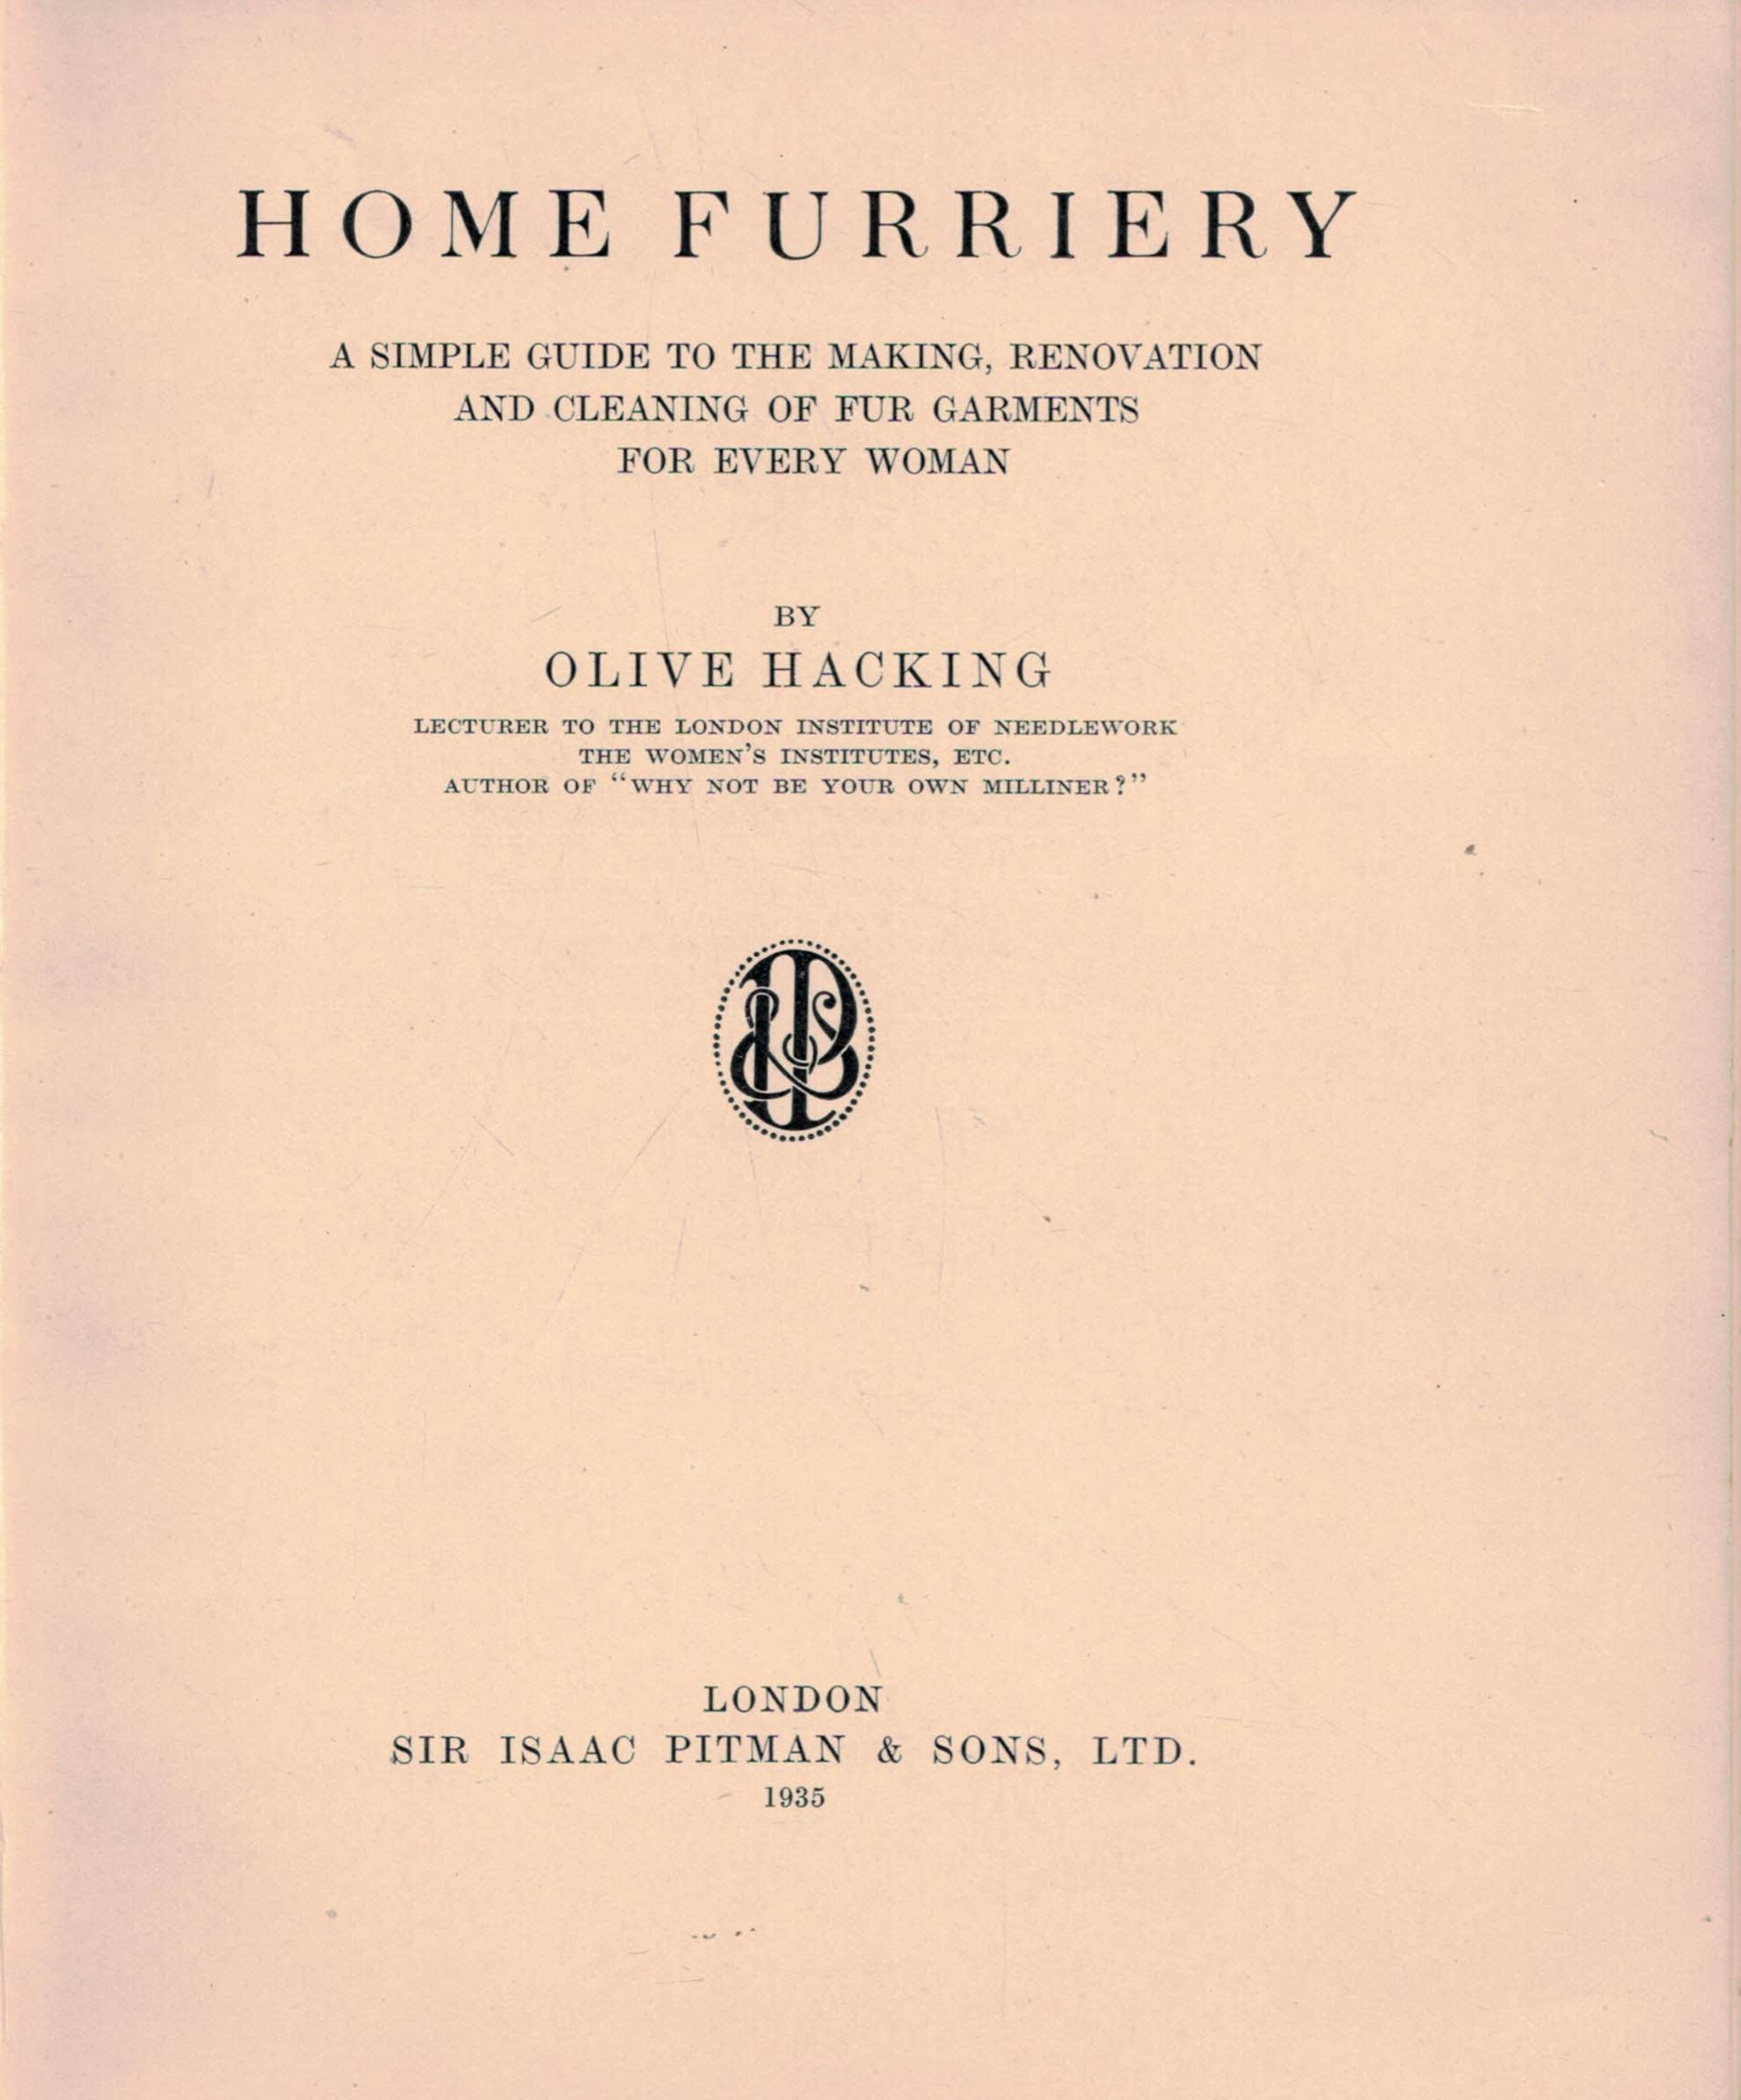 Home Furriery. A Simple Guide to the Making, Renovation and Cleaning of Fur Garments for Every Woman.